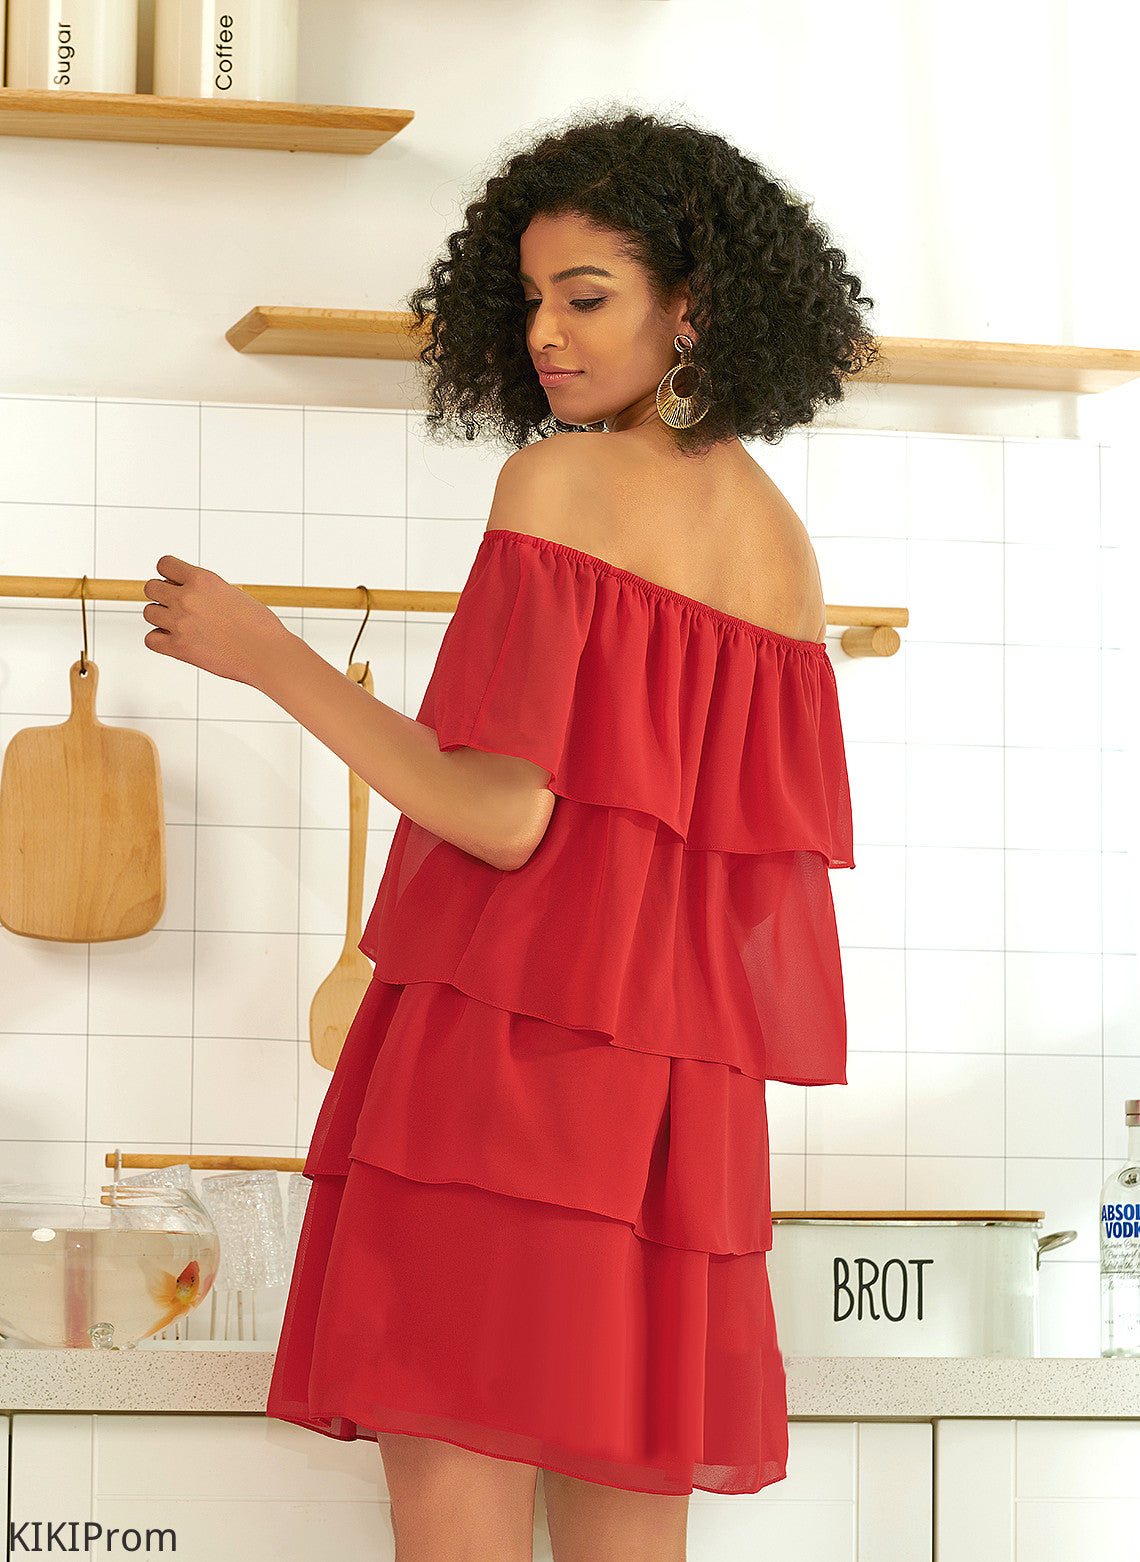 Chiffon Ruffle Cocktail Cocktail Dresses With Off-the-Shoulder Dress Autumn Short/Mini